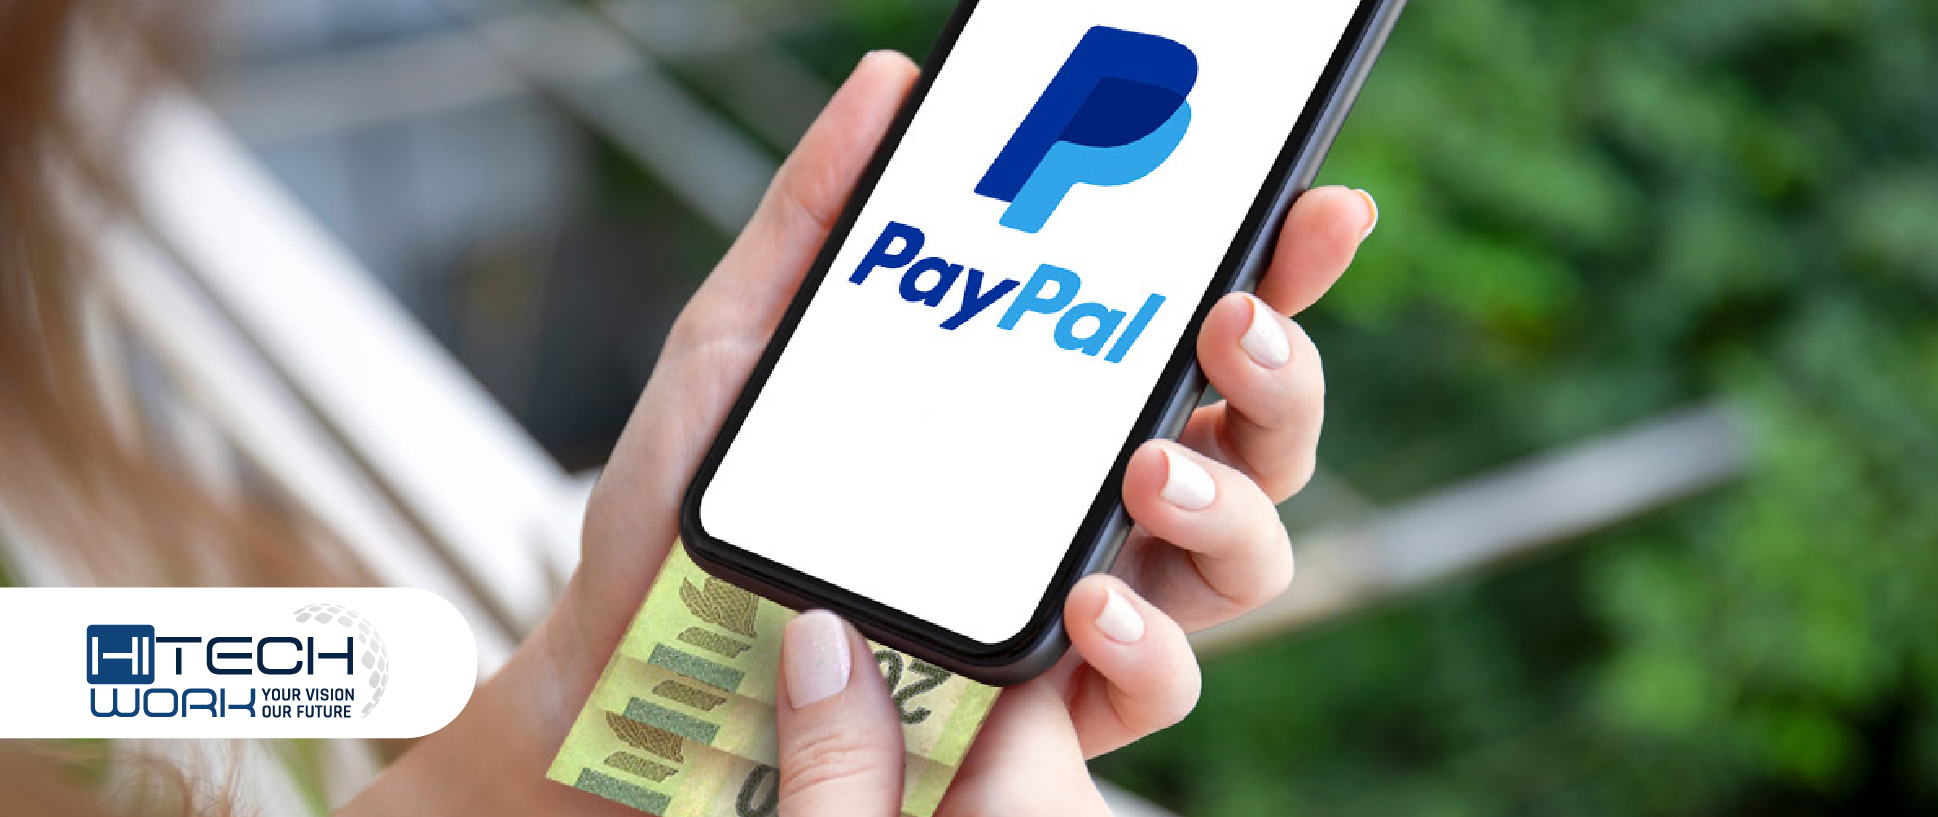 How to Add Money to PayPal using Cash card